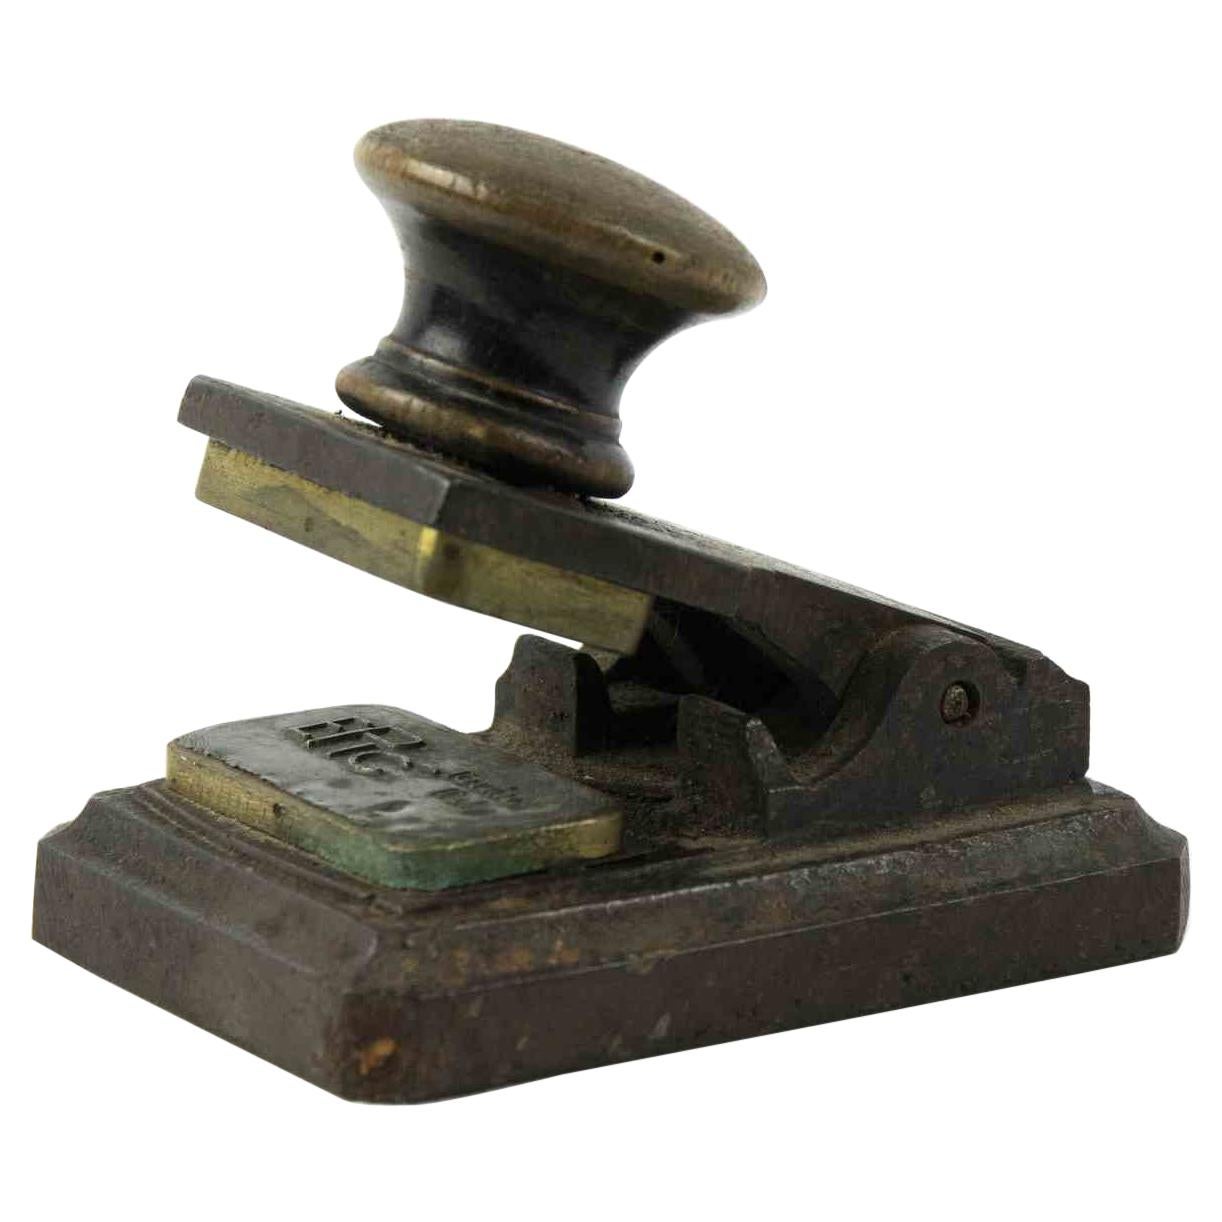 Rubber Stamp - 2 For Sale on 1stDibs | antique rubber stamps 